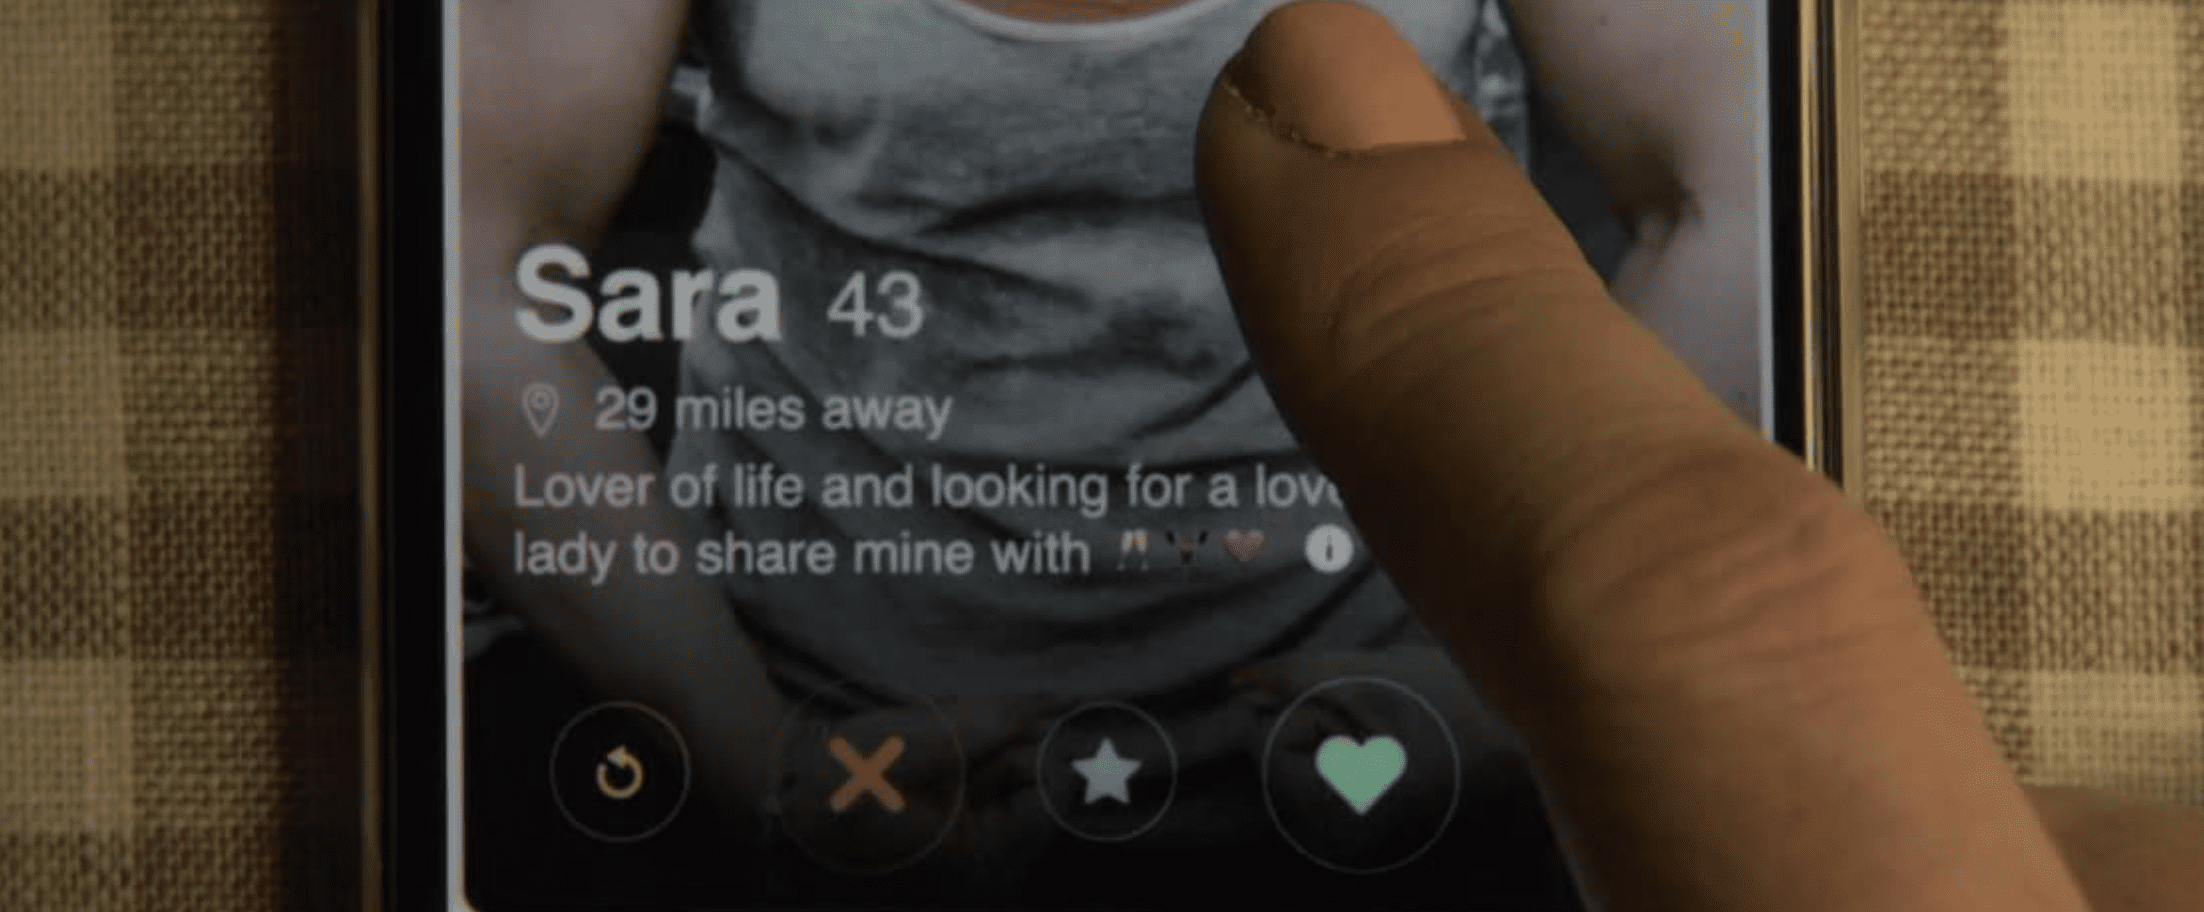 A finger hovers over a dating app in this image from Netflix